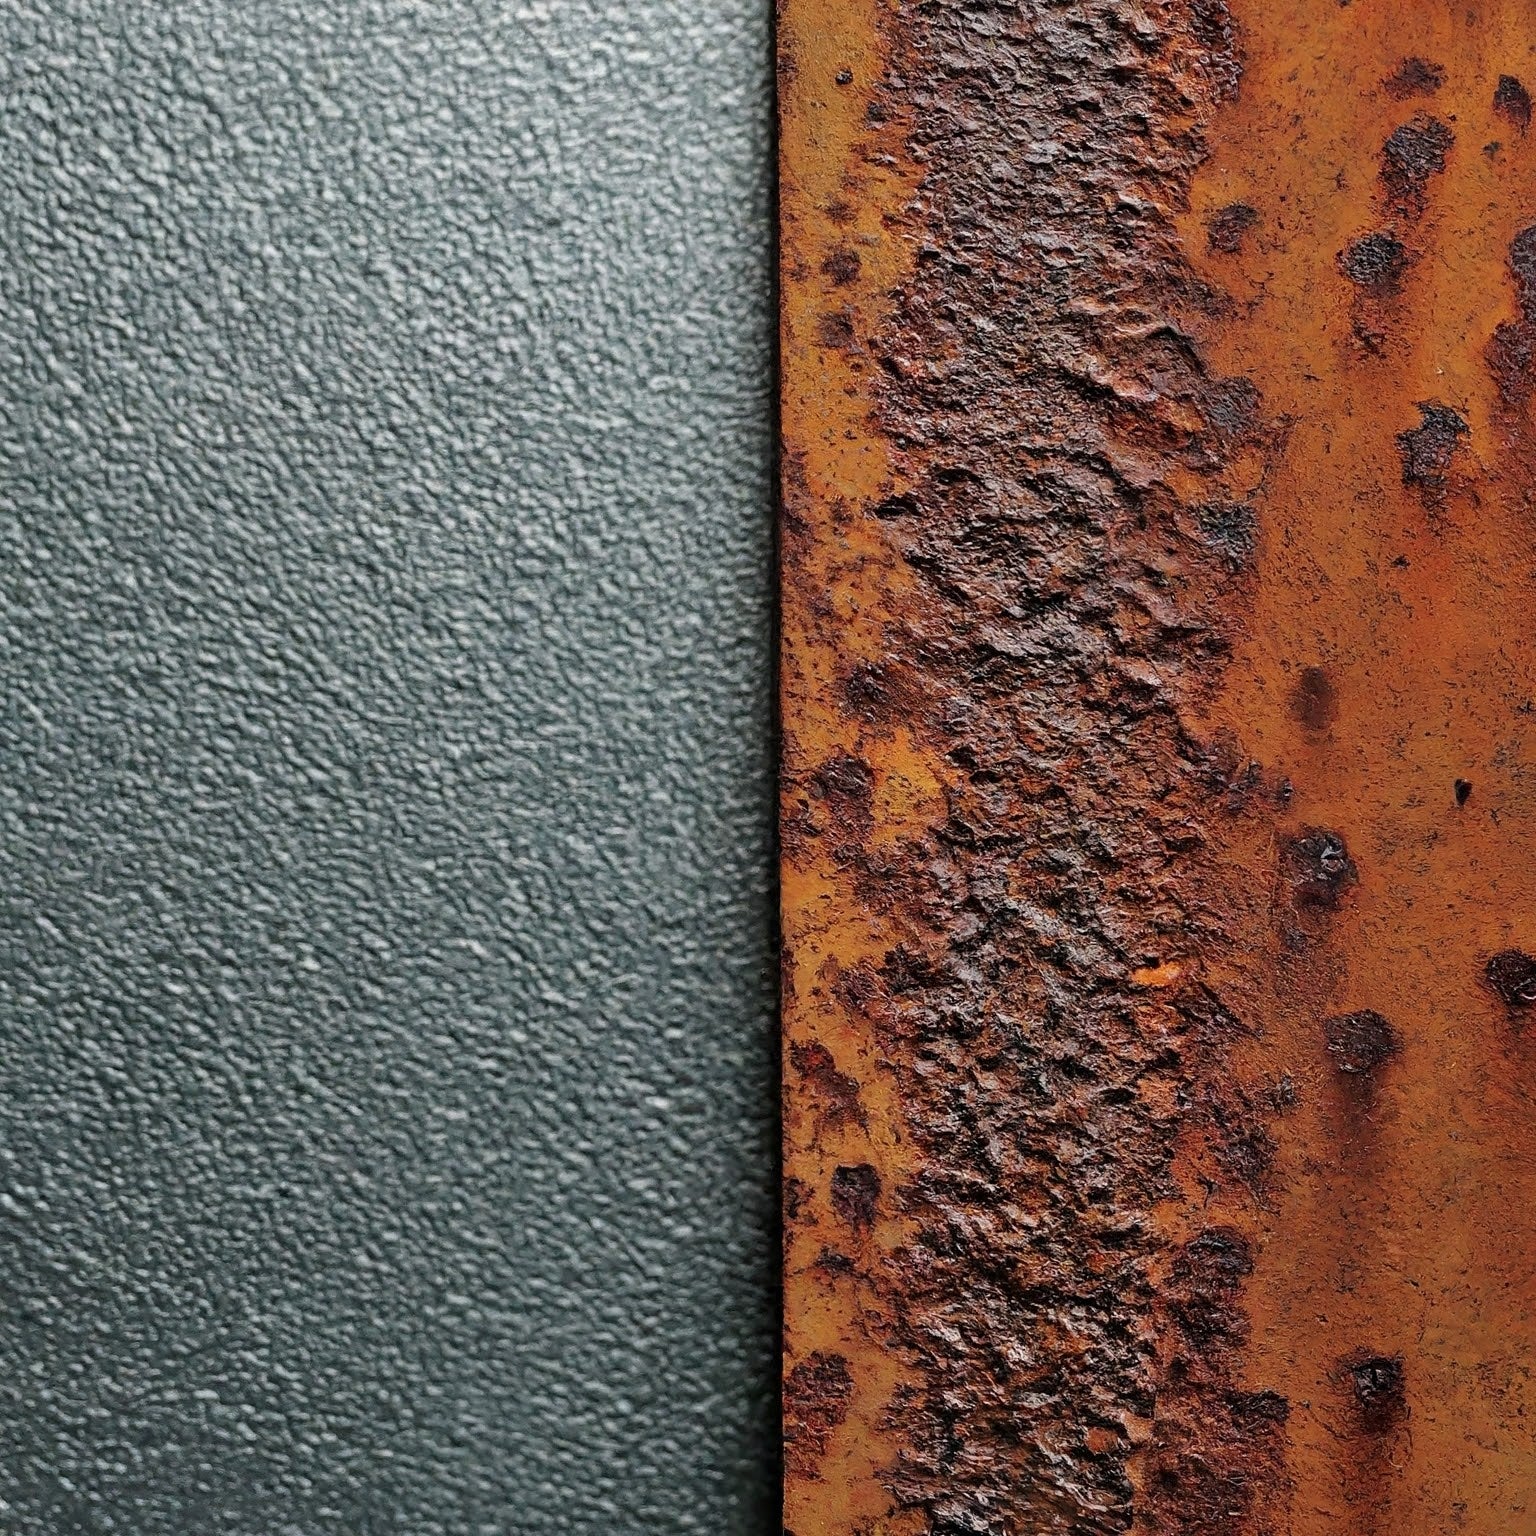 A rusty metal plate next to a clean abrasively blasted metal plate